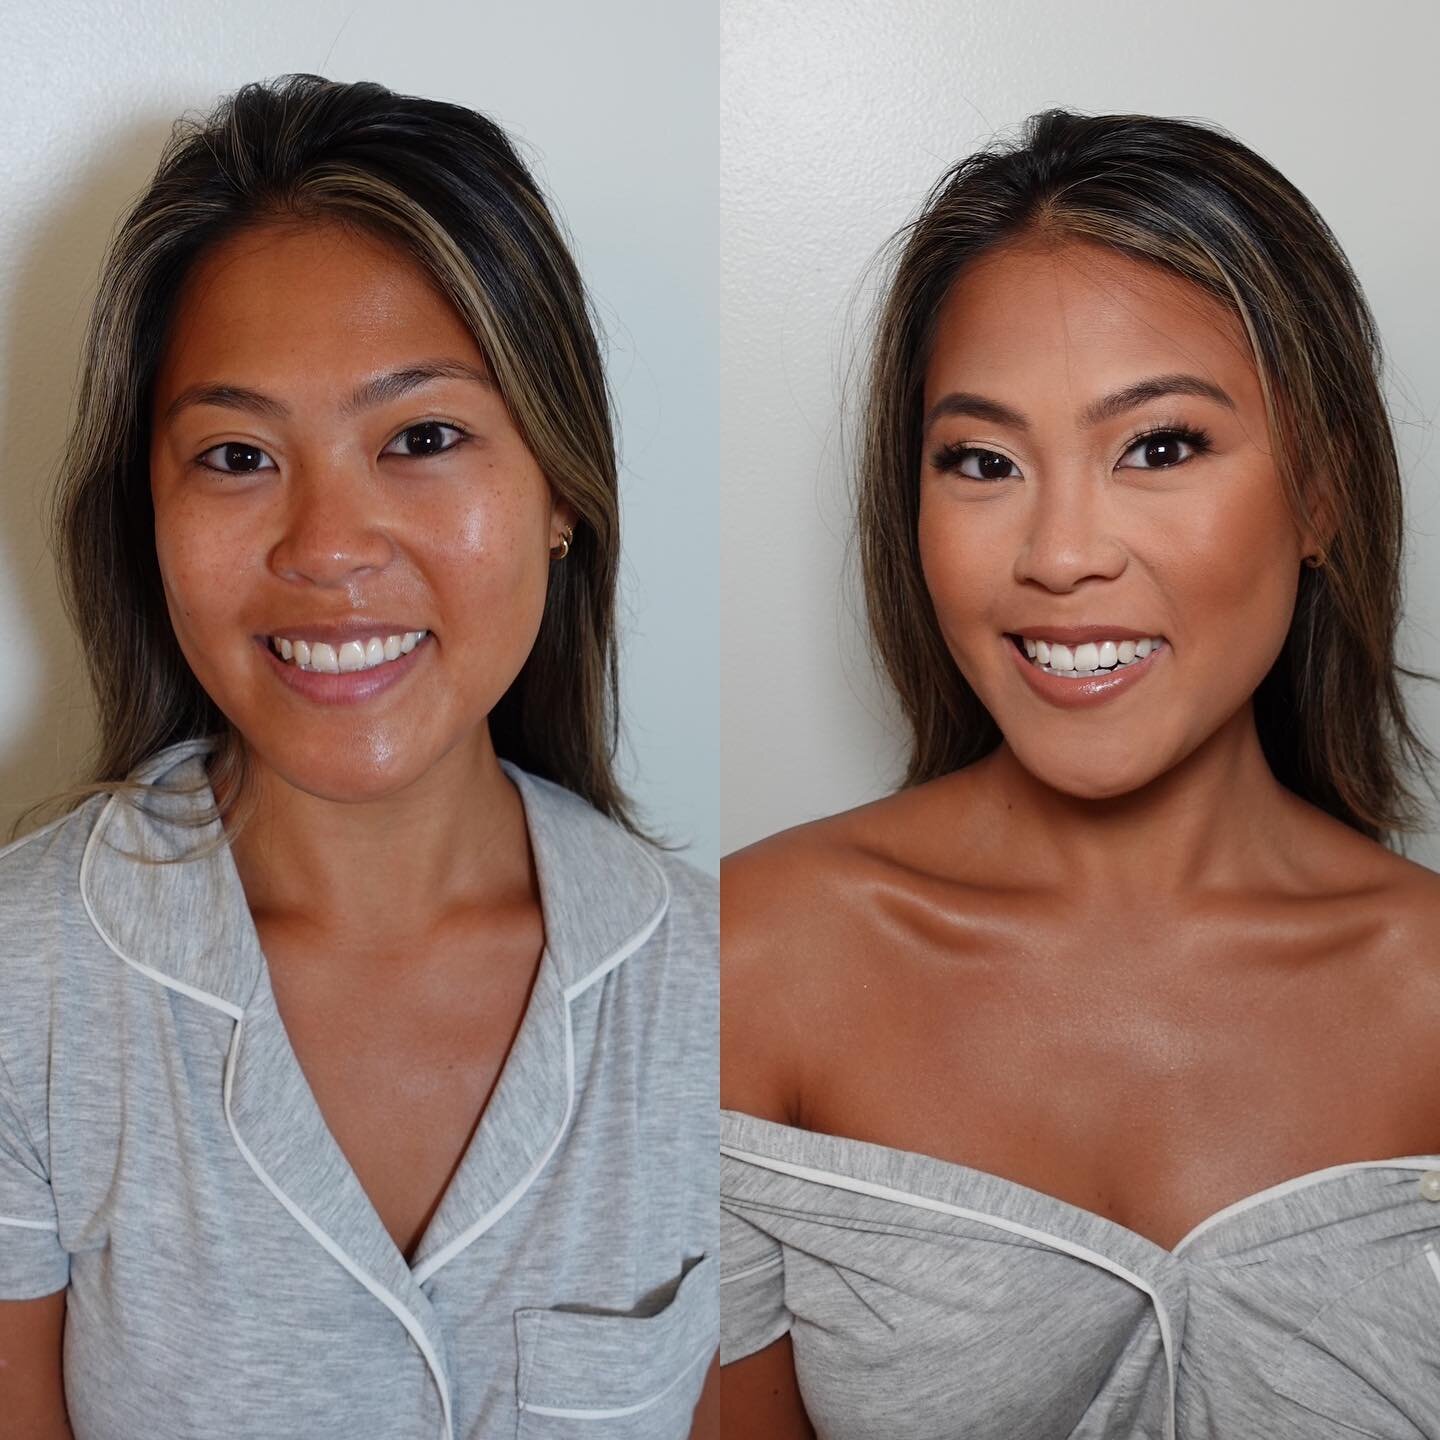 beautiful before and after of a beautiful bridesmaid!!

key notes about this look:

✨ she wanted structure, so we made sure to contour the face to get a snatched effect

✨ we kept the complexion satin matte and created an all matte eye look with a li